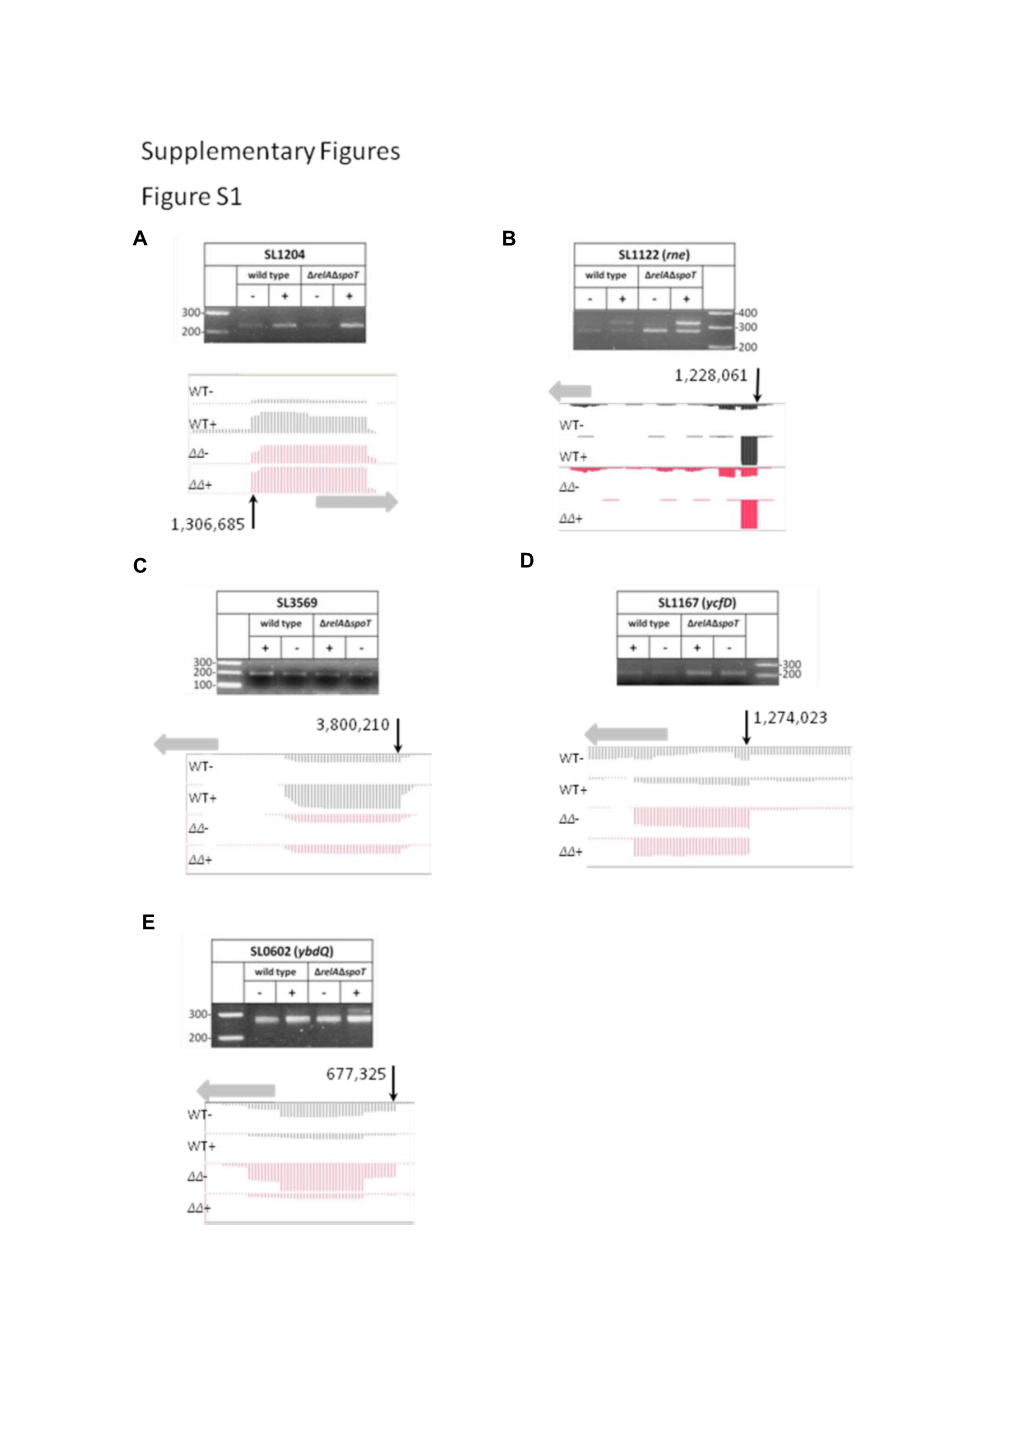 Functional Category Analysis of 1932 Promoters of Annotated Chromosomal SL1344 Orfs That